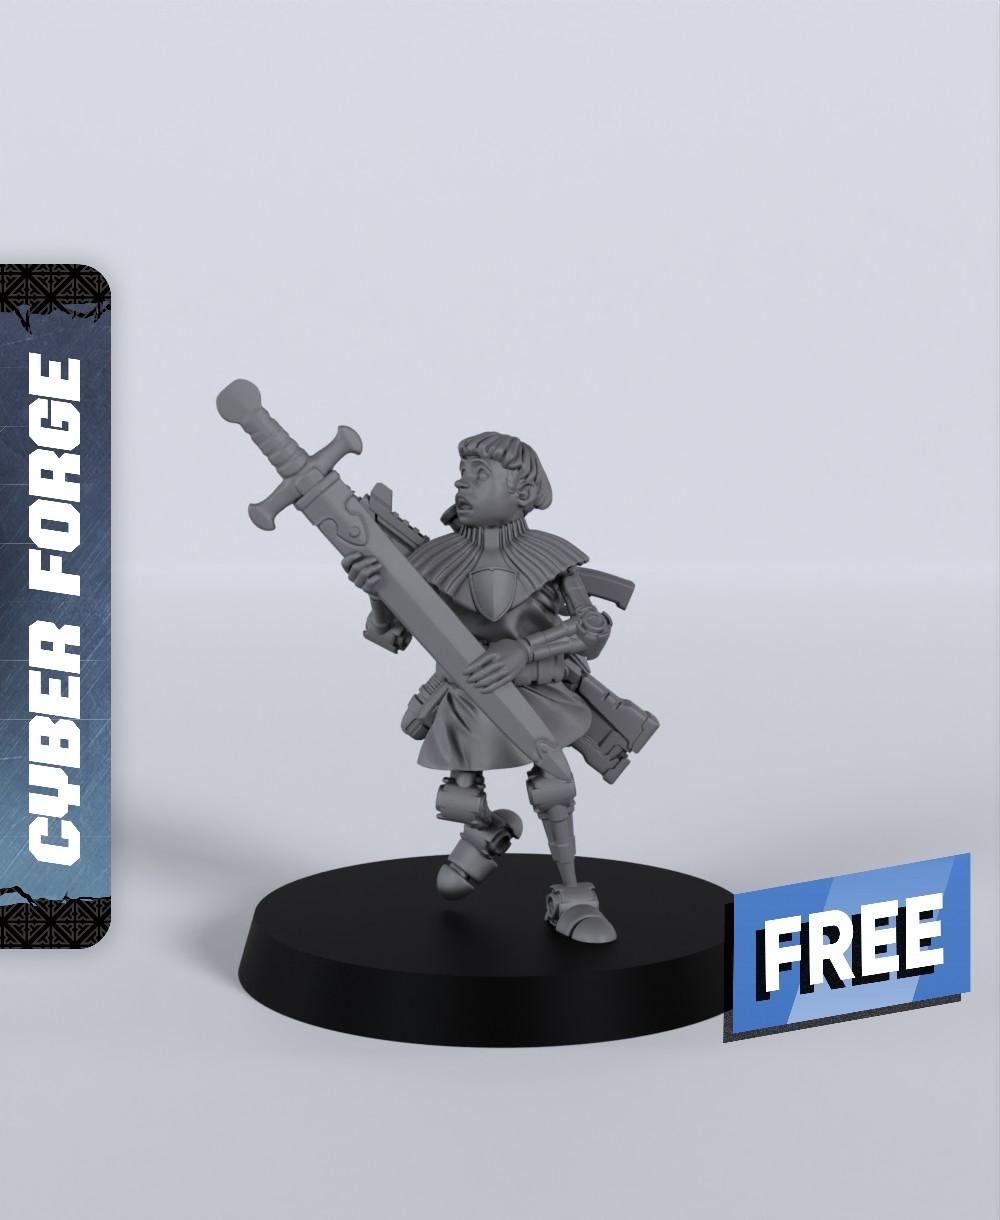 Butters the Squire - With Free Cyberpunk Warhammer - 40k Sci-Fi Gift Ideas for RPG and Wargamers 3d model